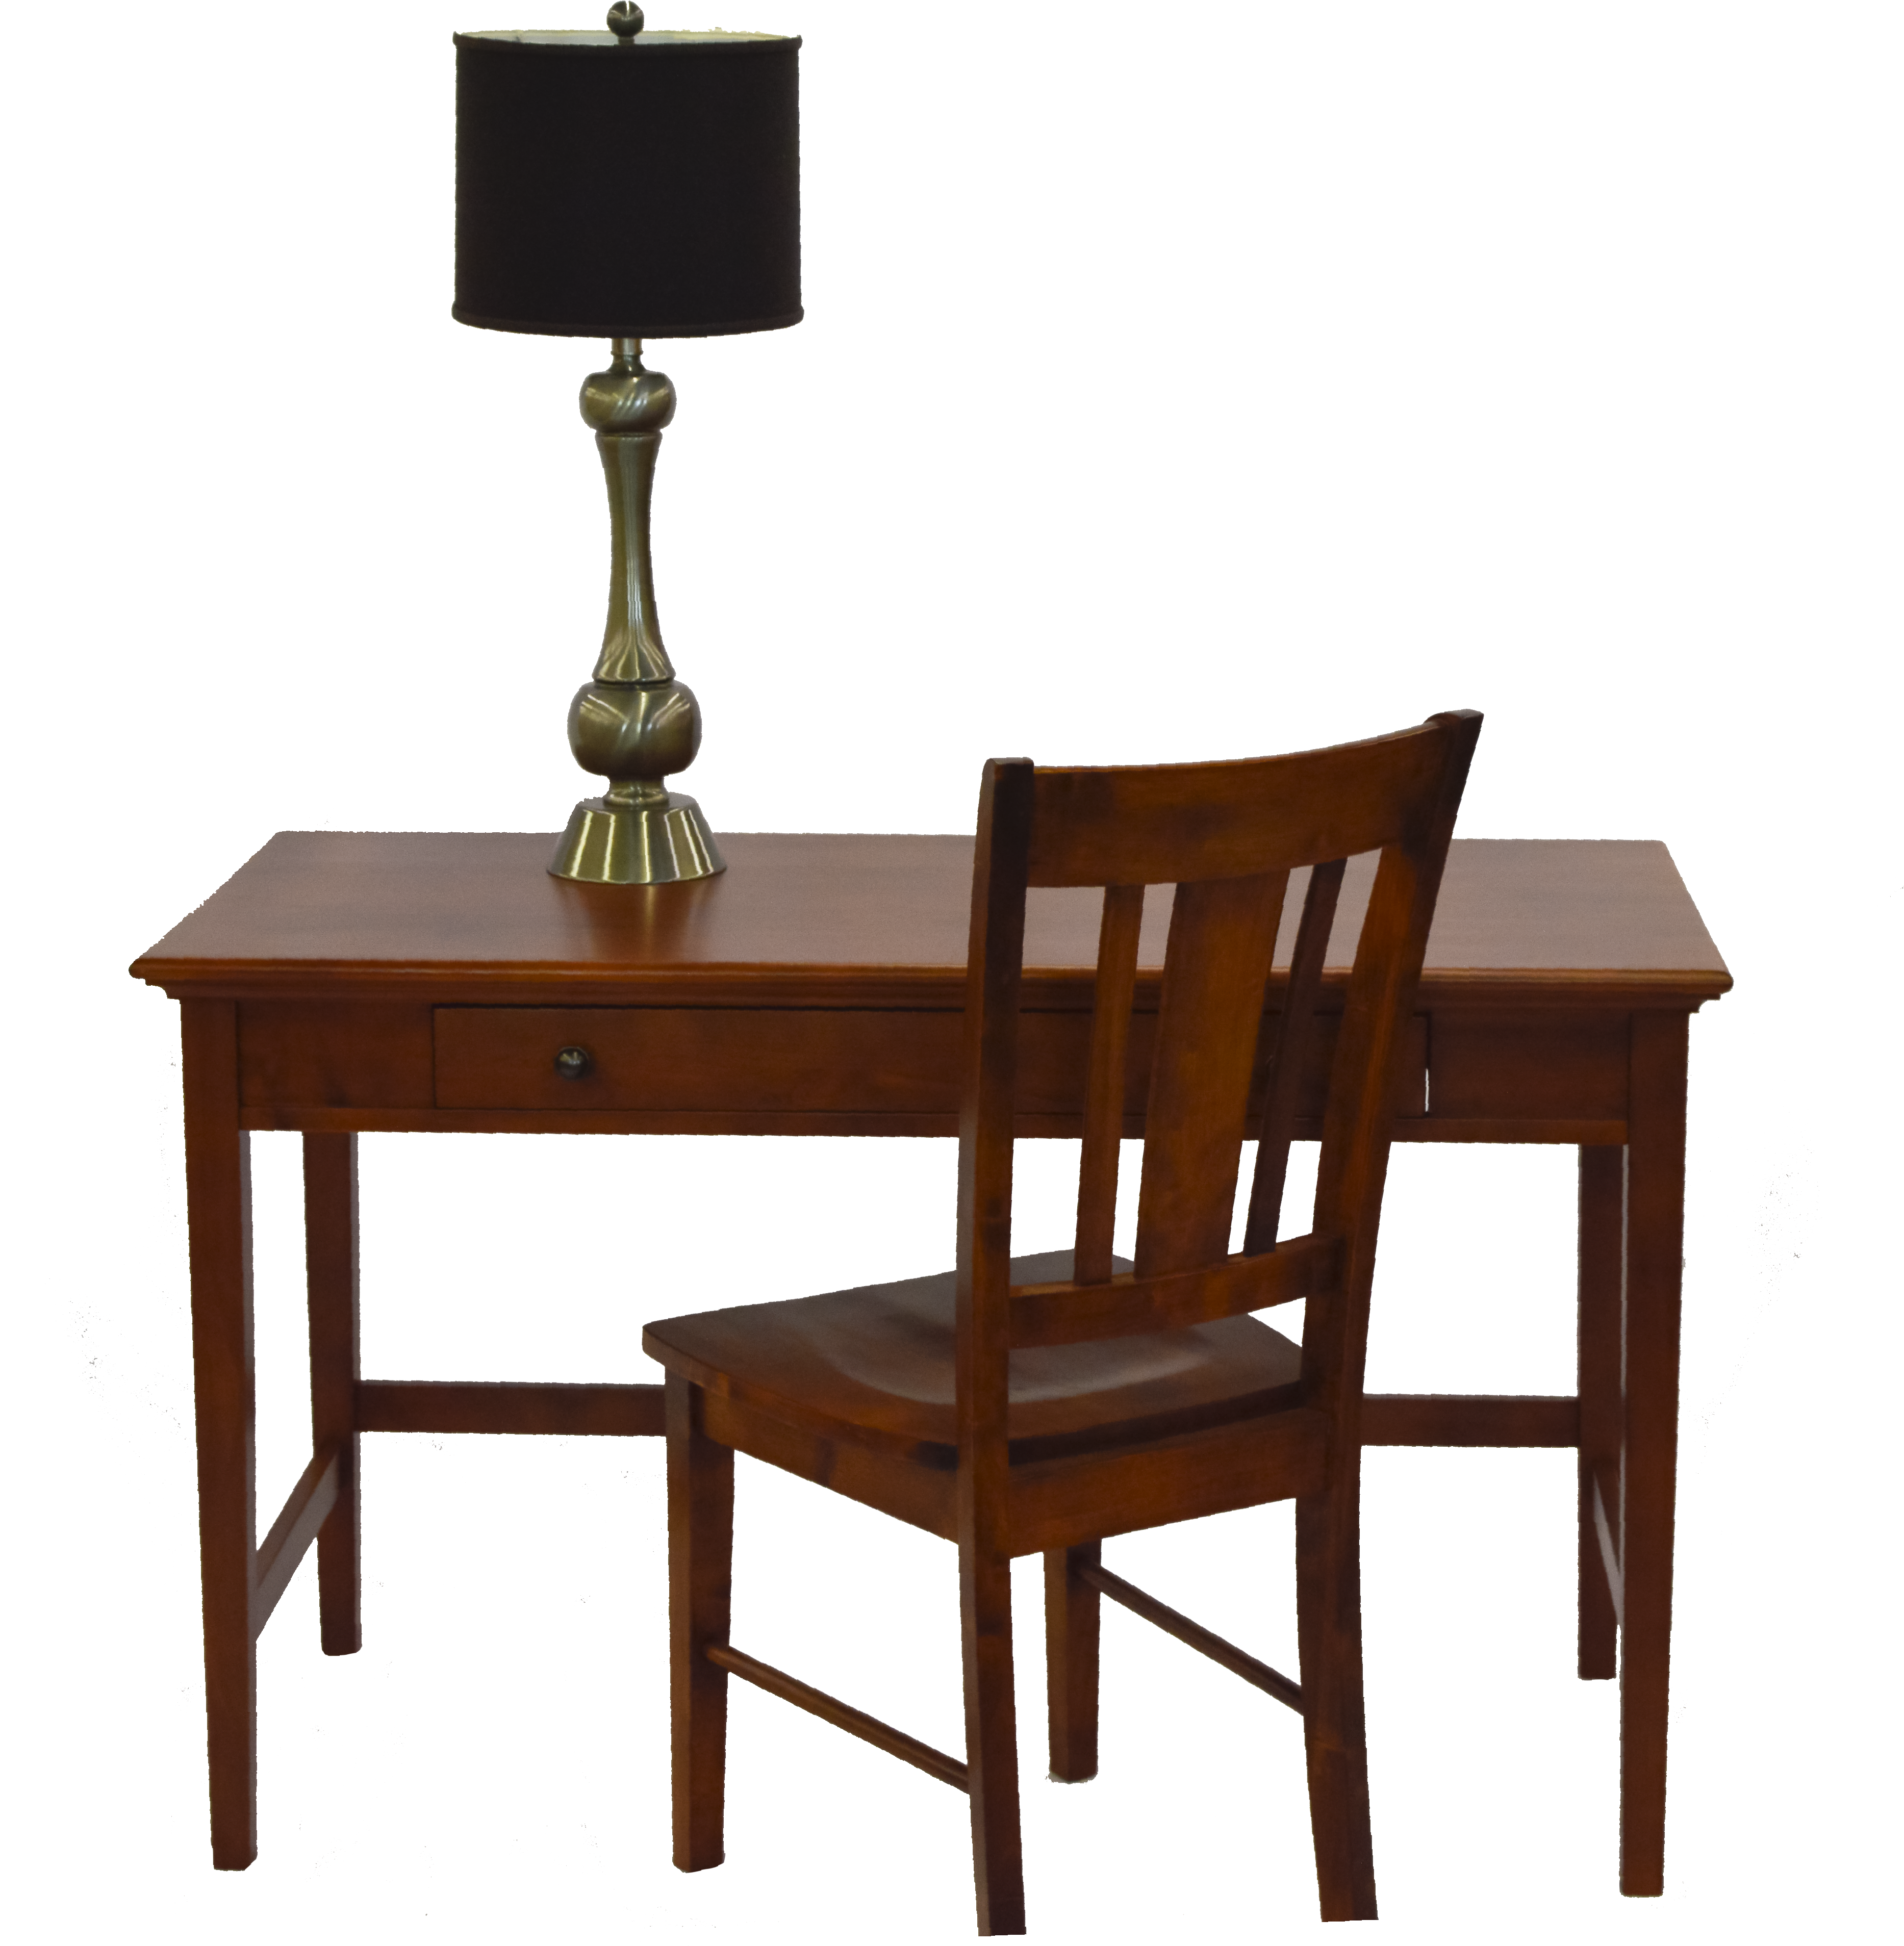 Wooden Deskand Chairwith Lamp